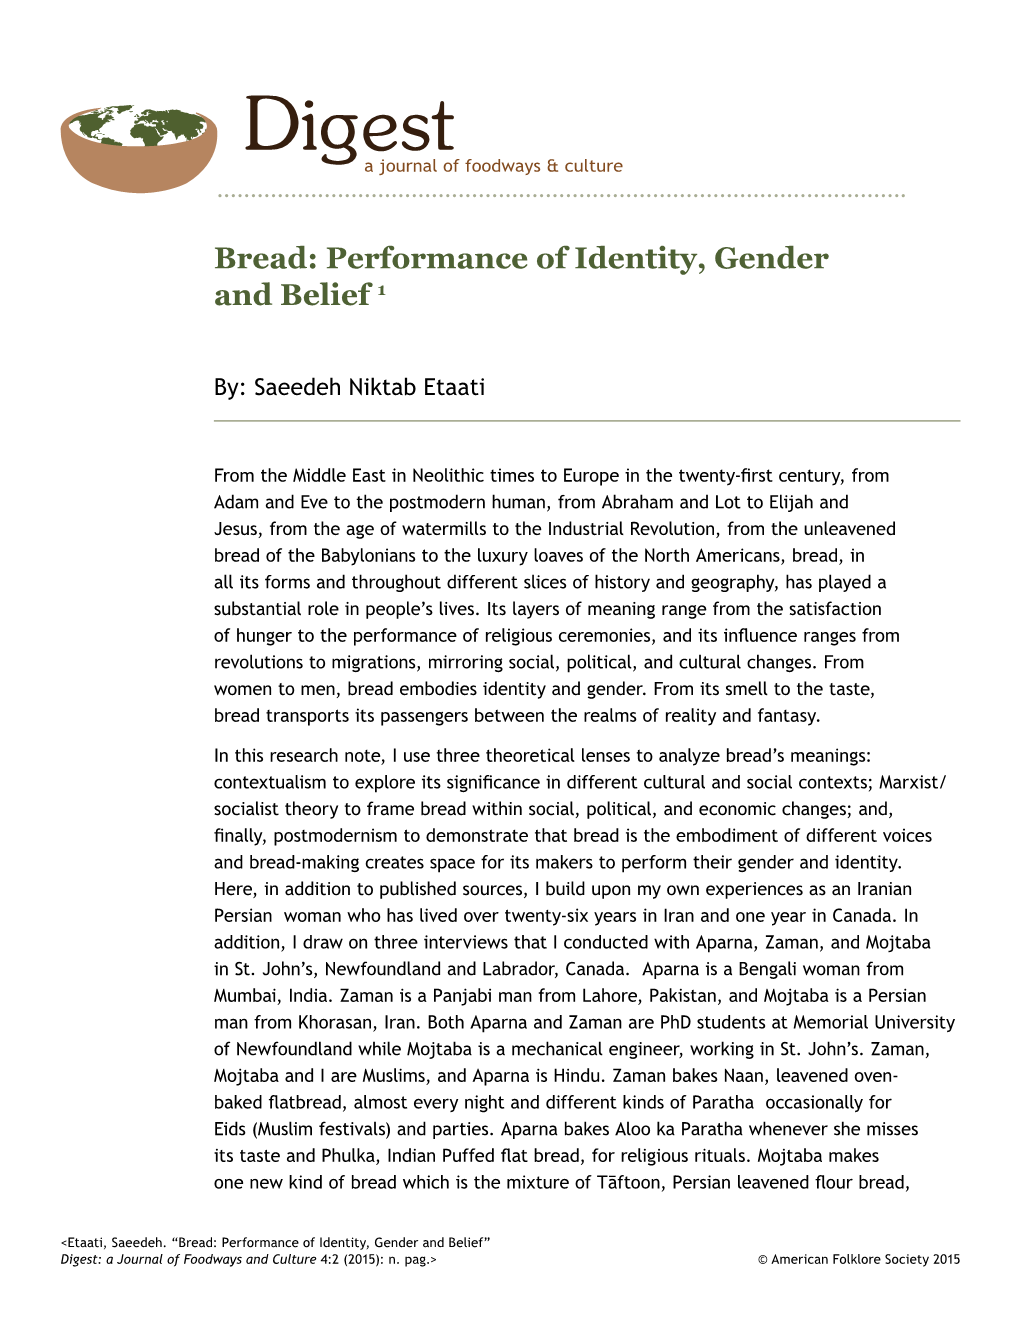 Bread: Performance of Identity, Gender and Belief 1